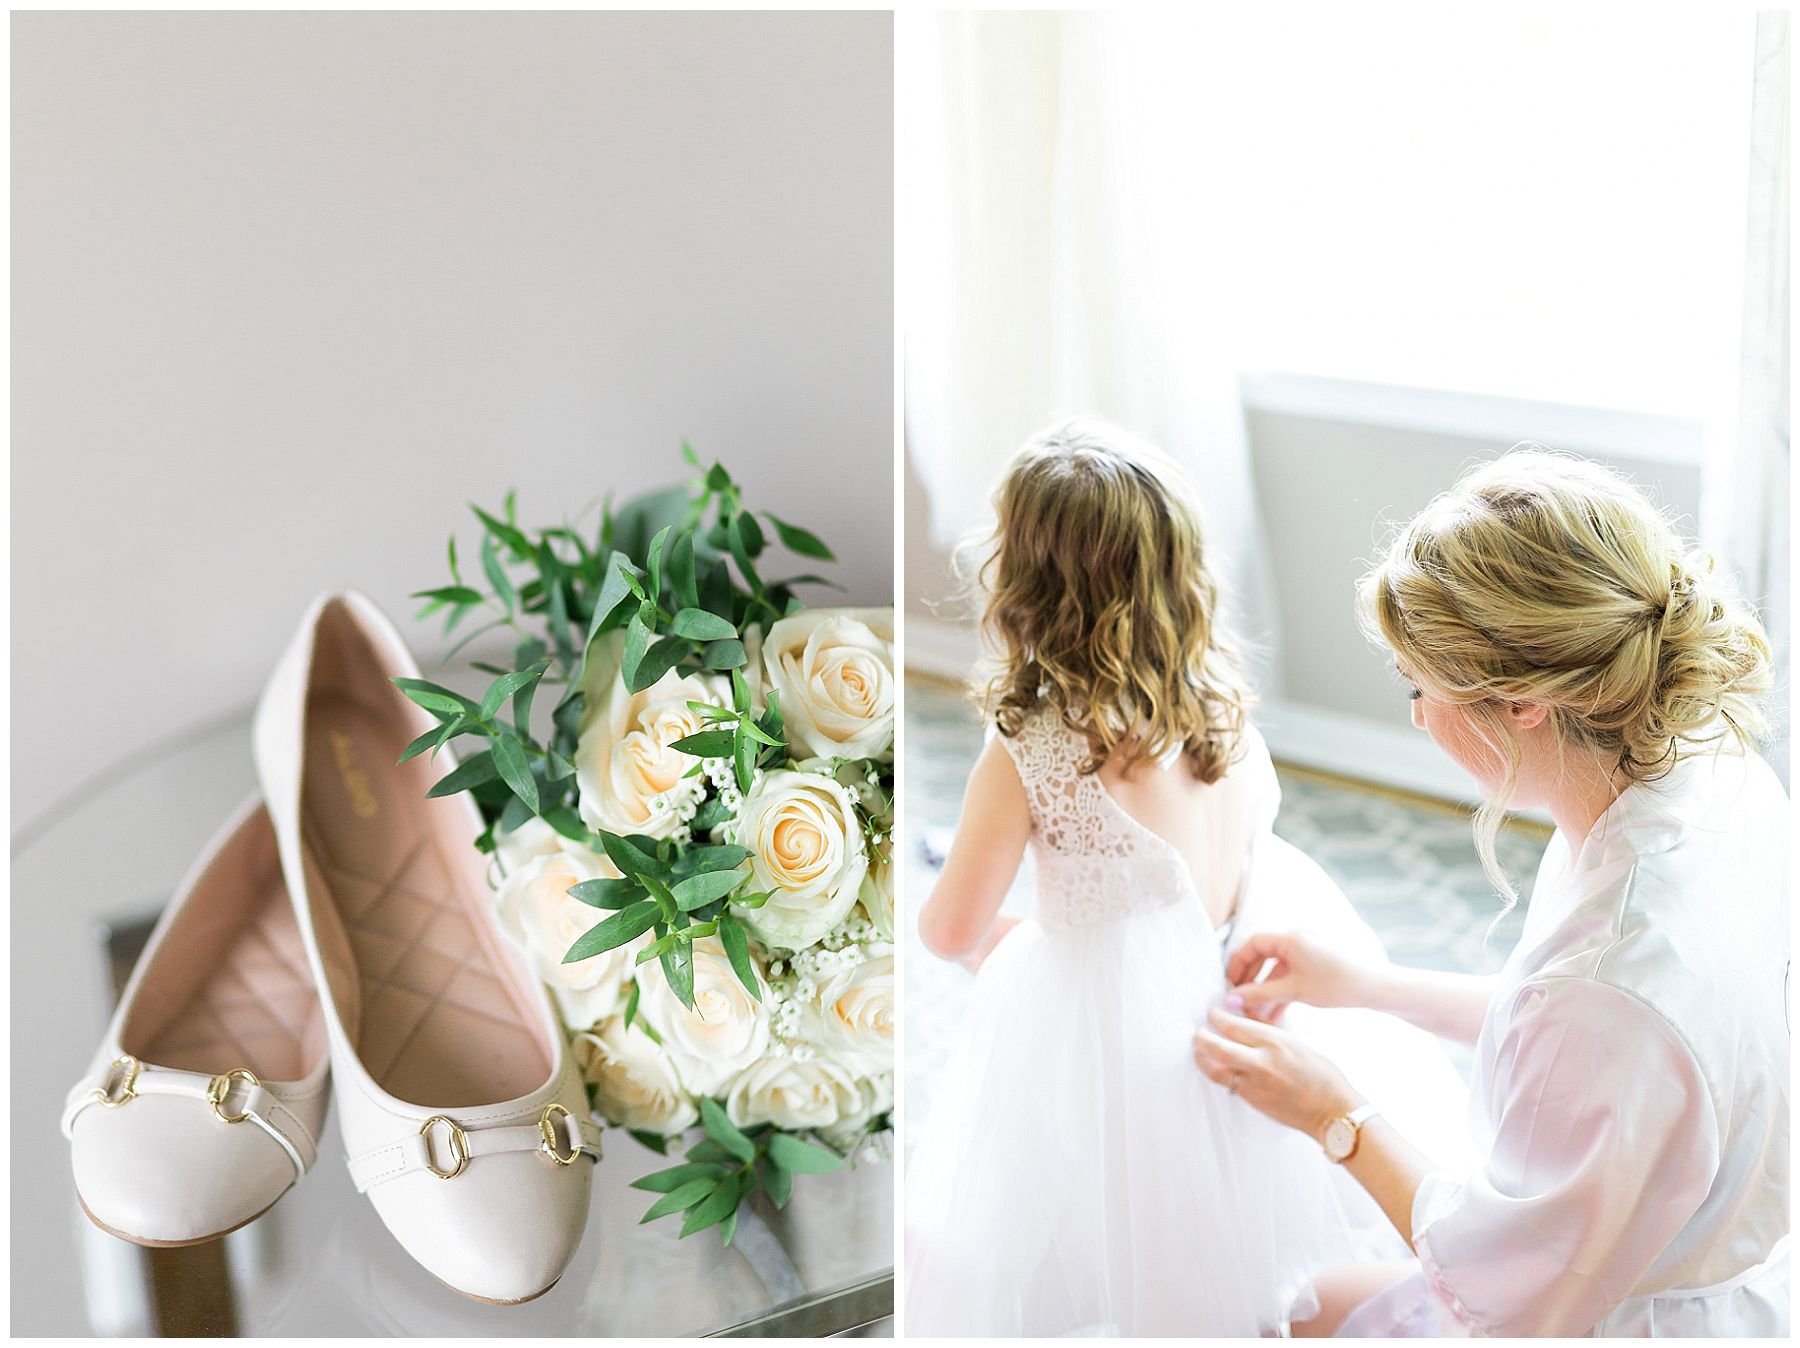 Bridal details. Wedding flats and bouquet of ivory spray roses